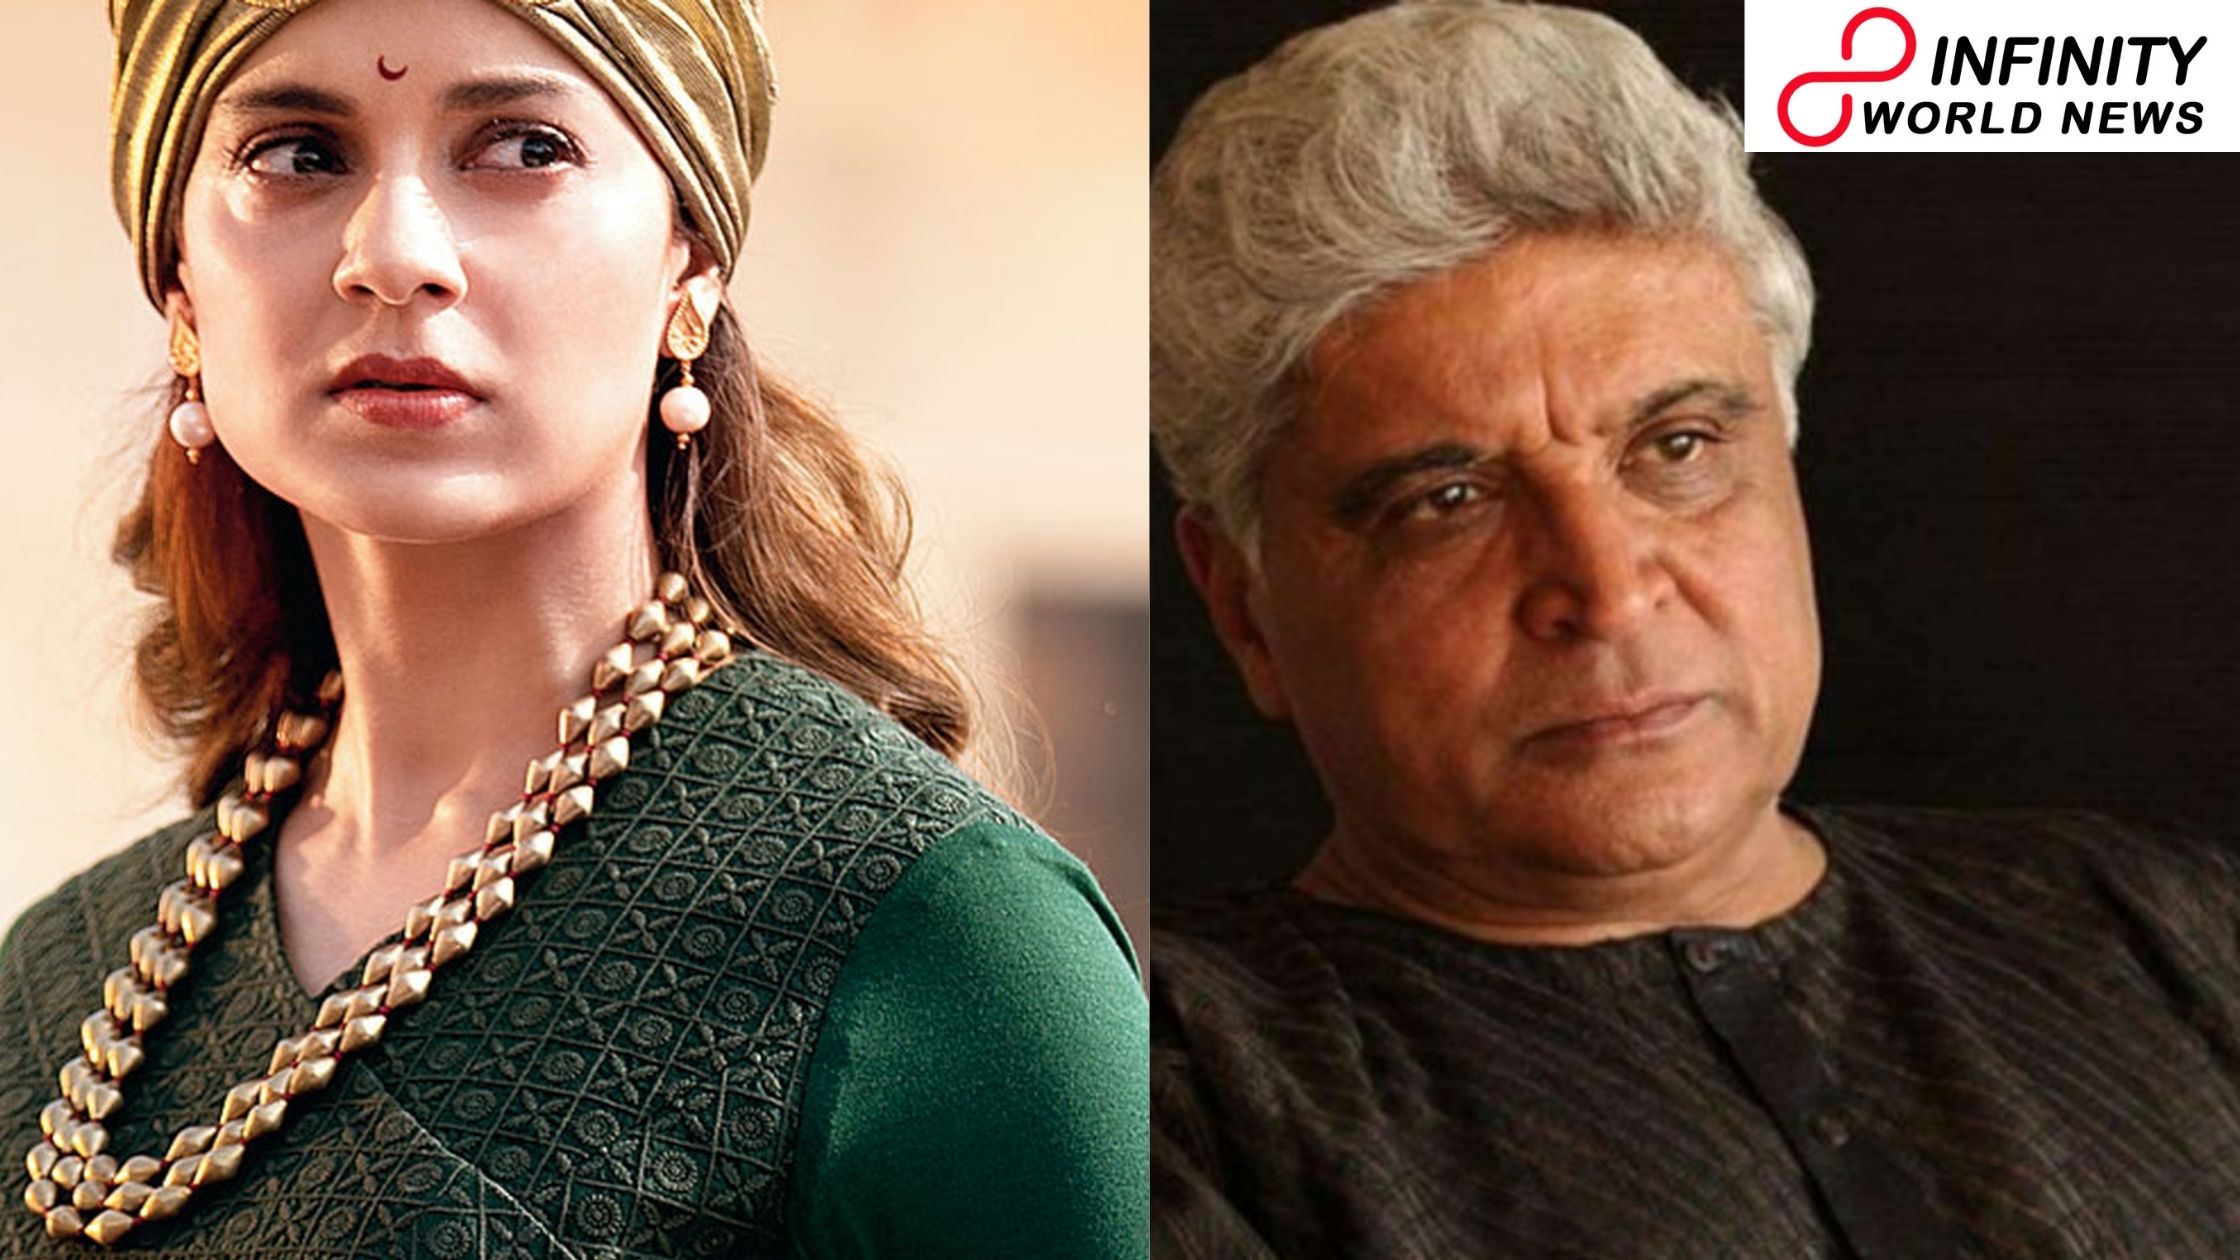 A defamation case file against Kangana Ranaut by Javed Akhtar